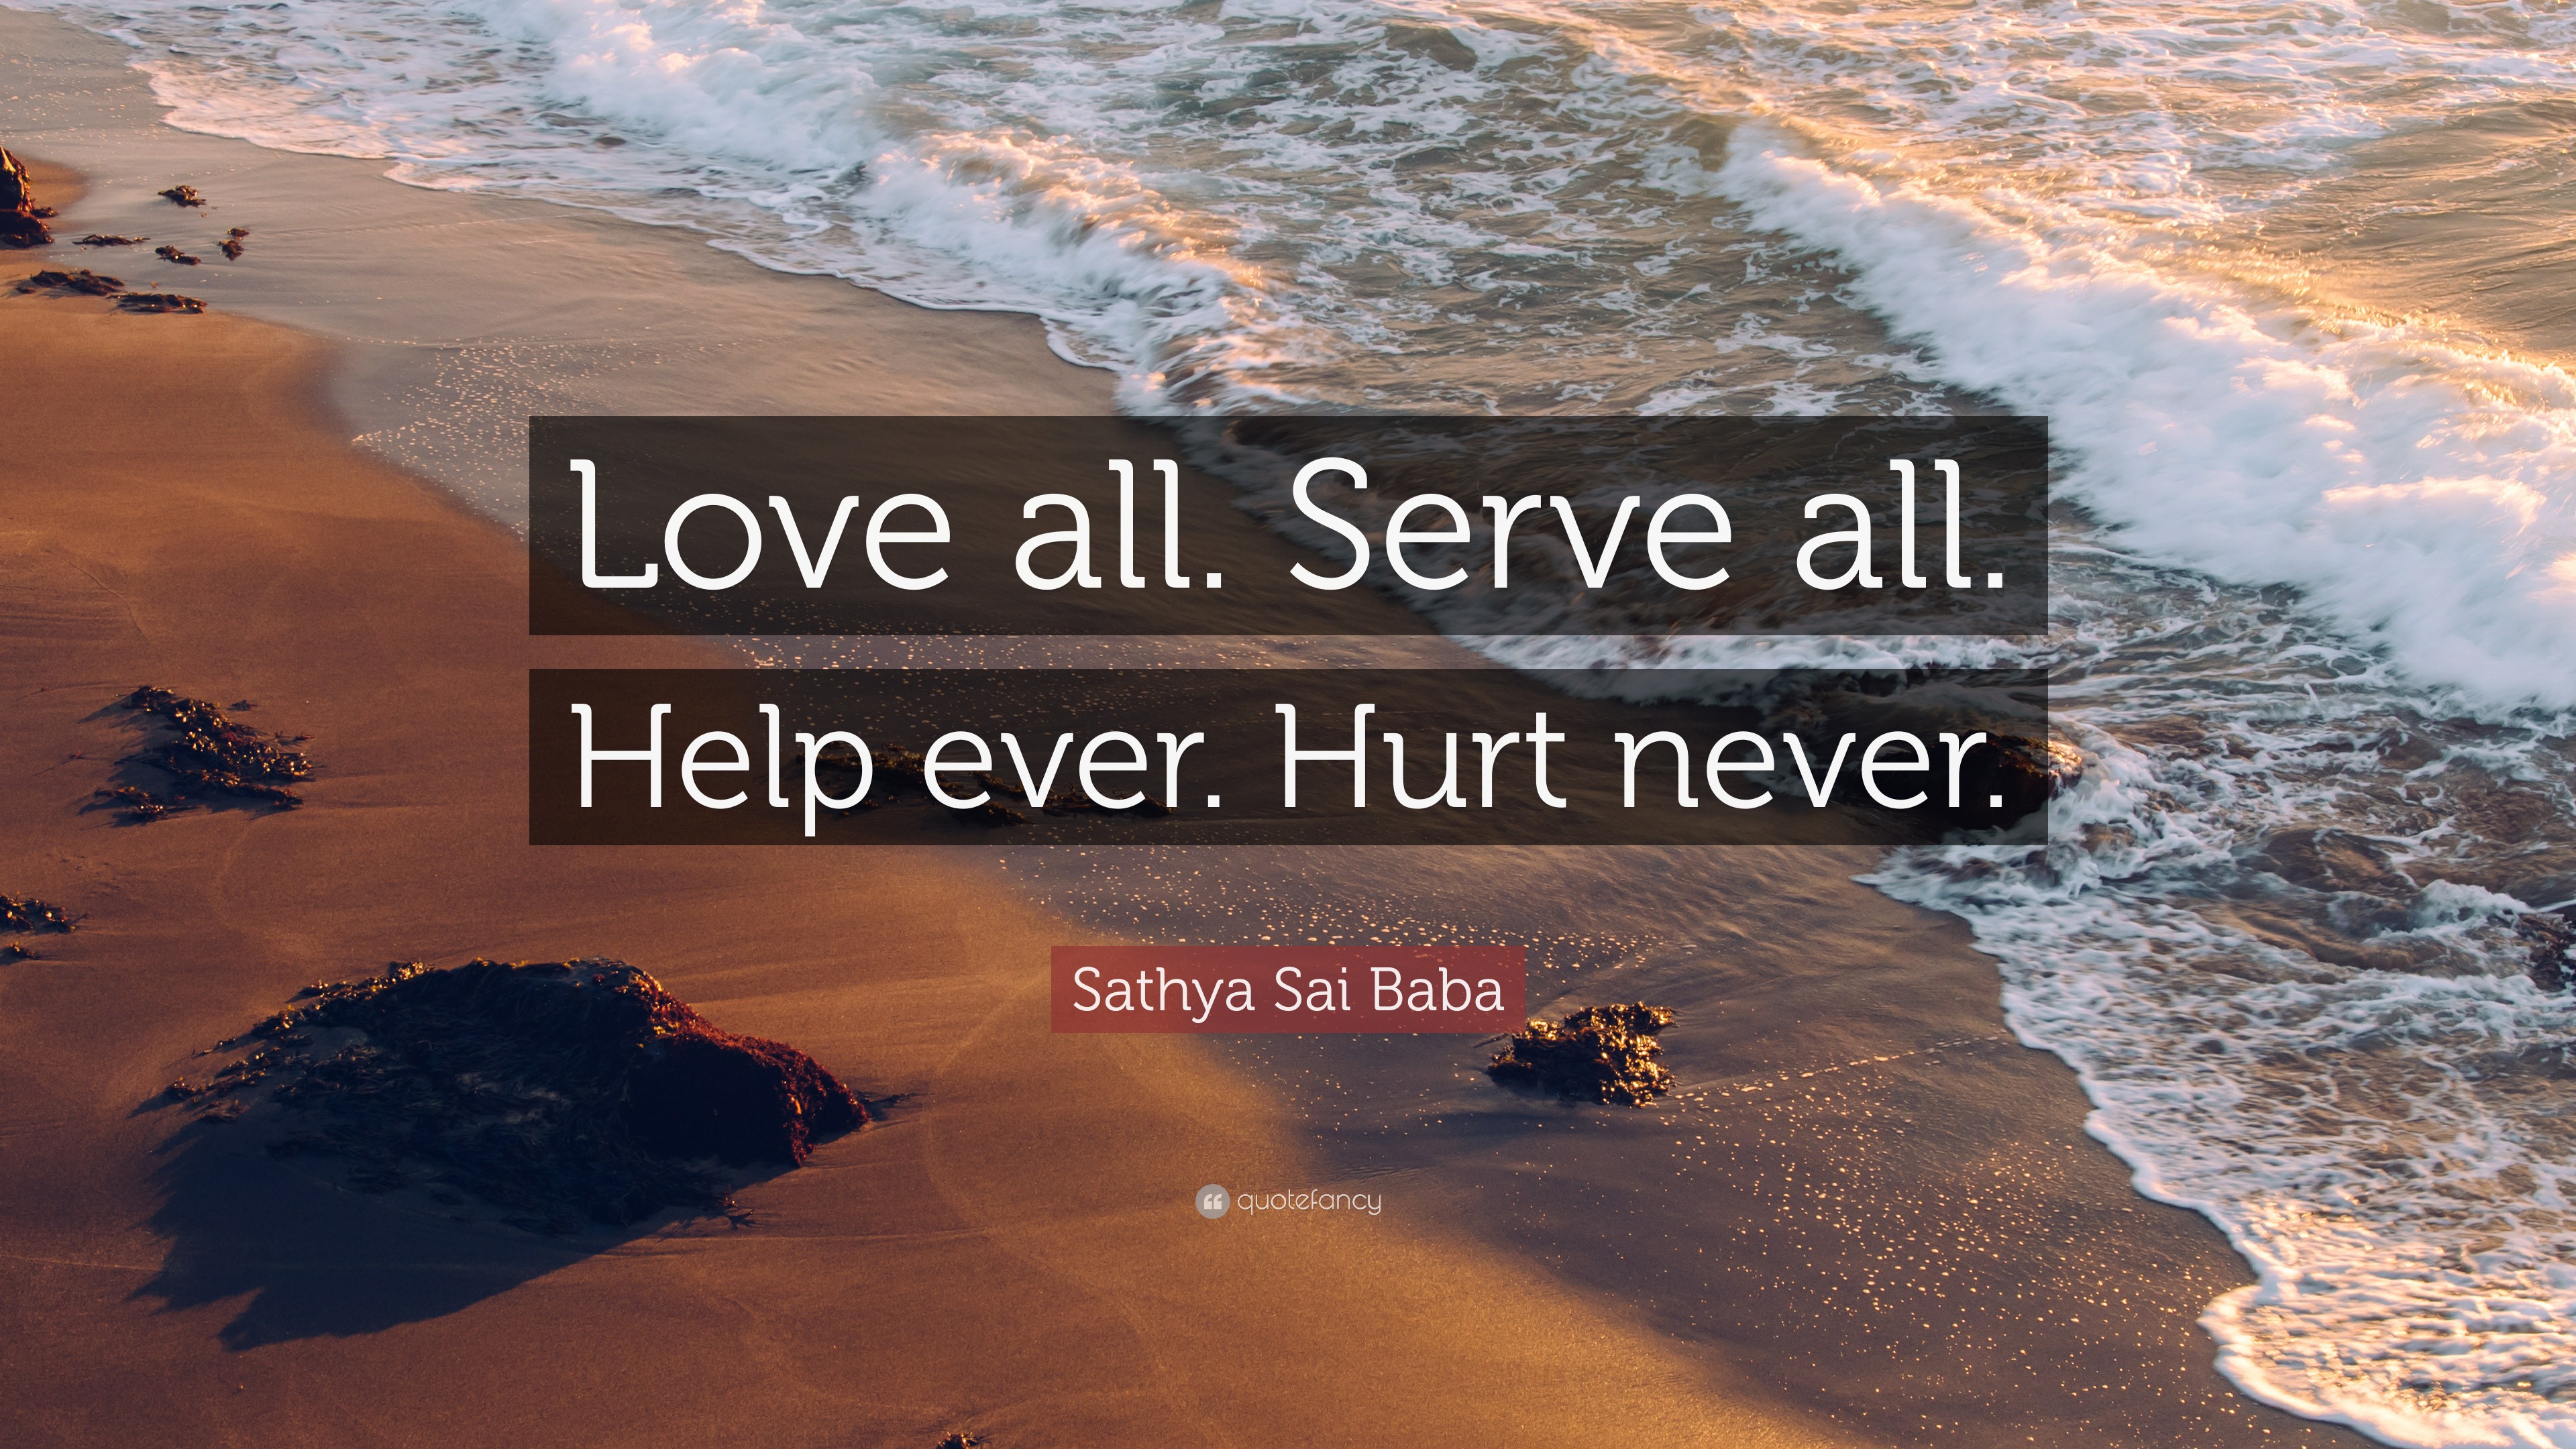 Sathya Sai Baba Quote: “Love all. Serve all. Help ever. Hurt never.”